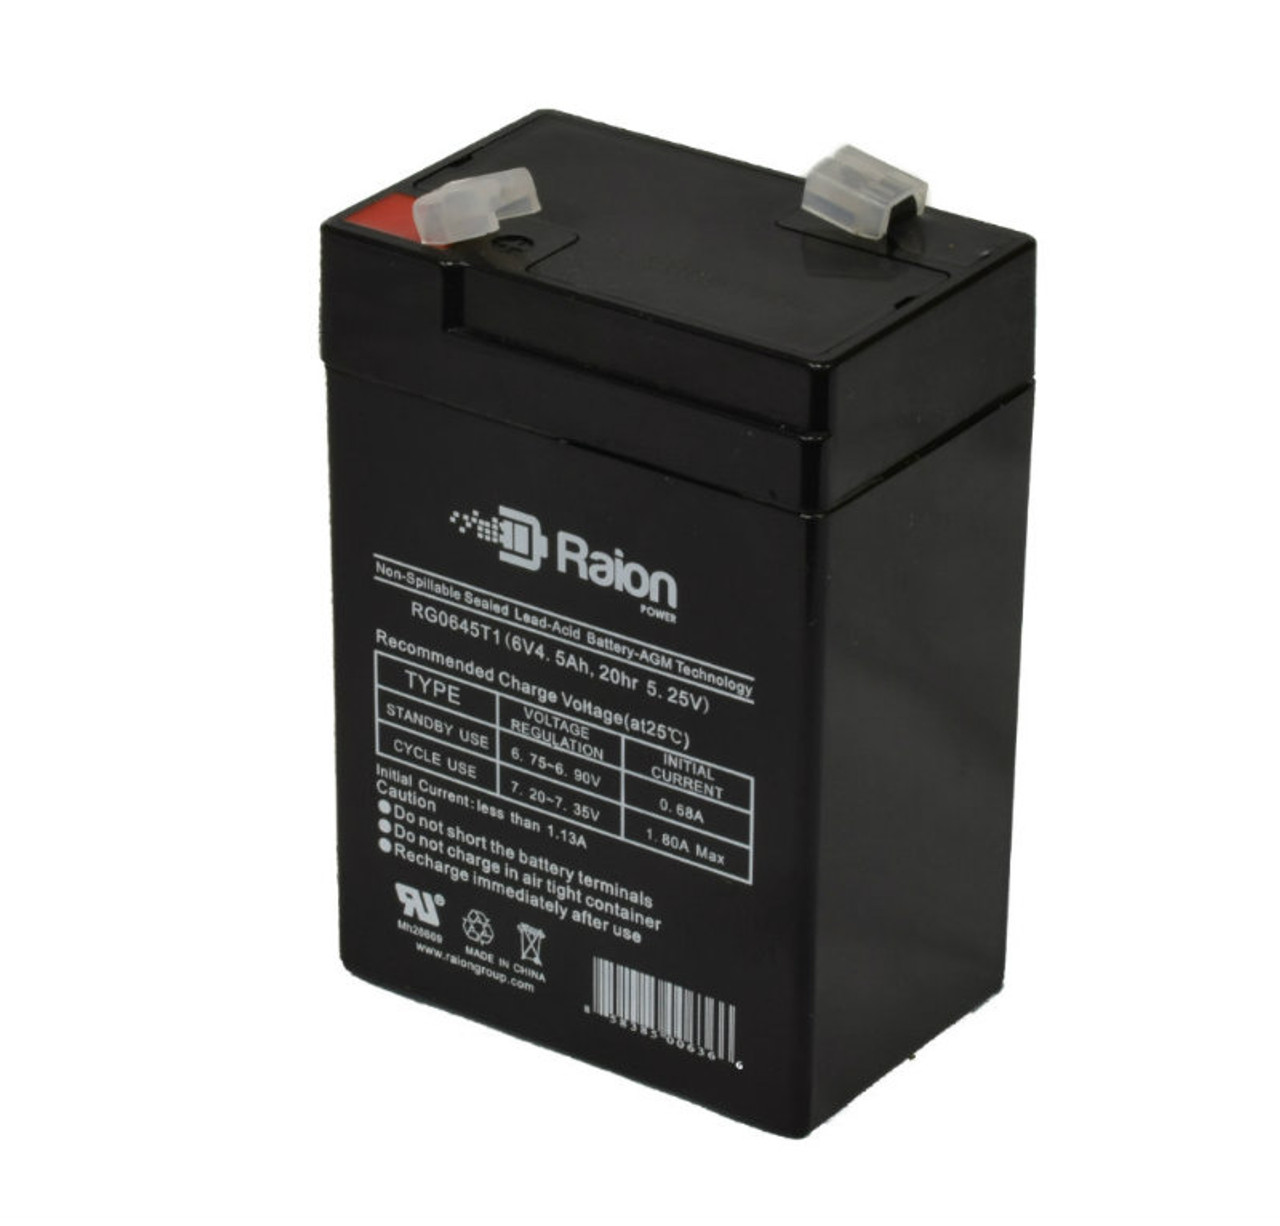 Raion Power RG0645T1 6V 4.5Ah Replacement Ride-On Toy Battery for RiiRoo 12V Bentley EXP12 Ride On Car